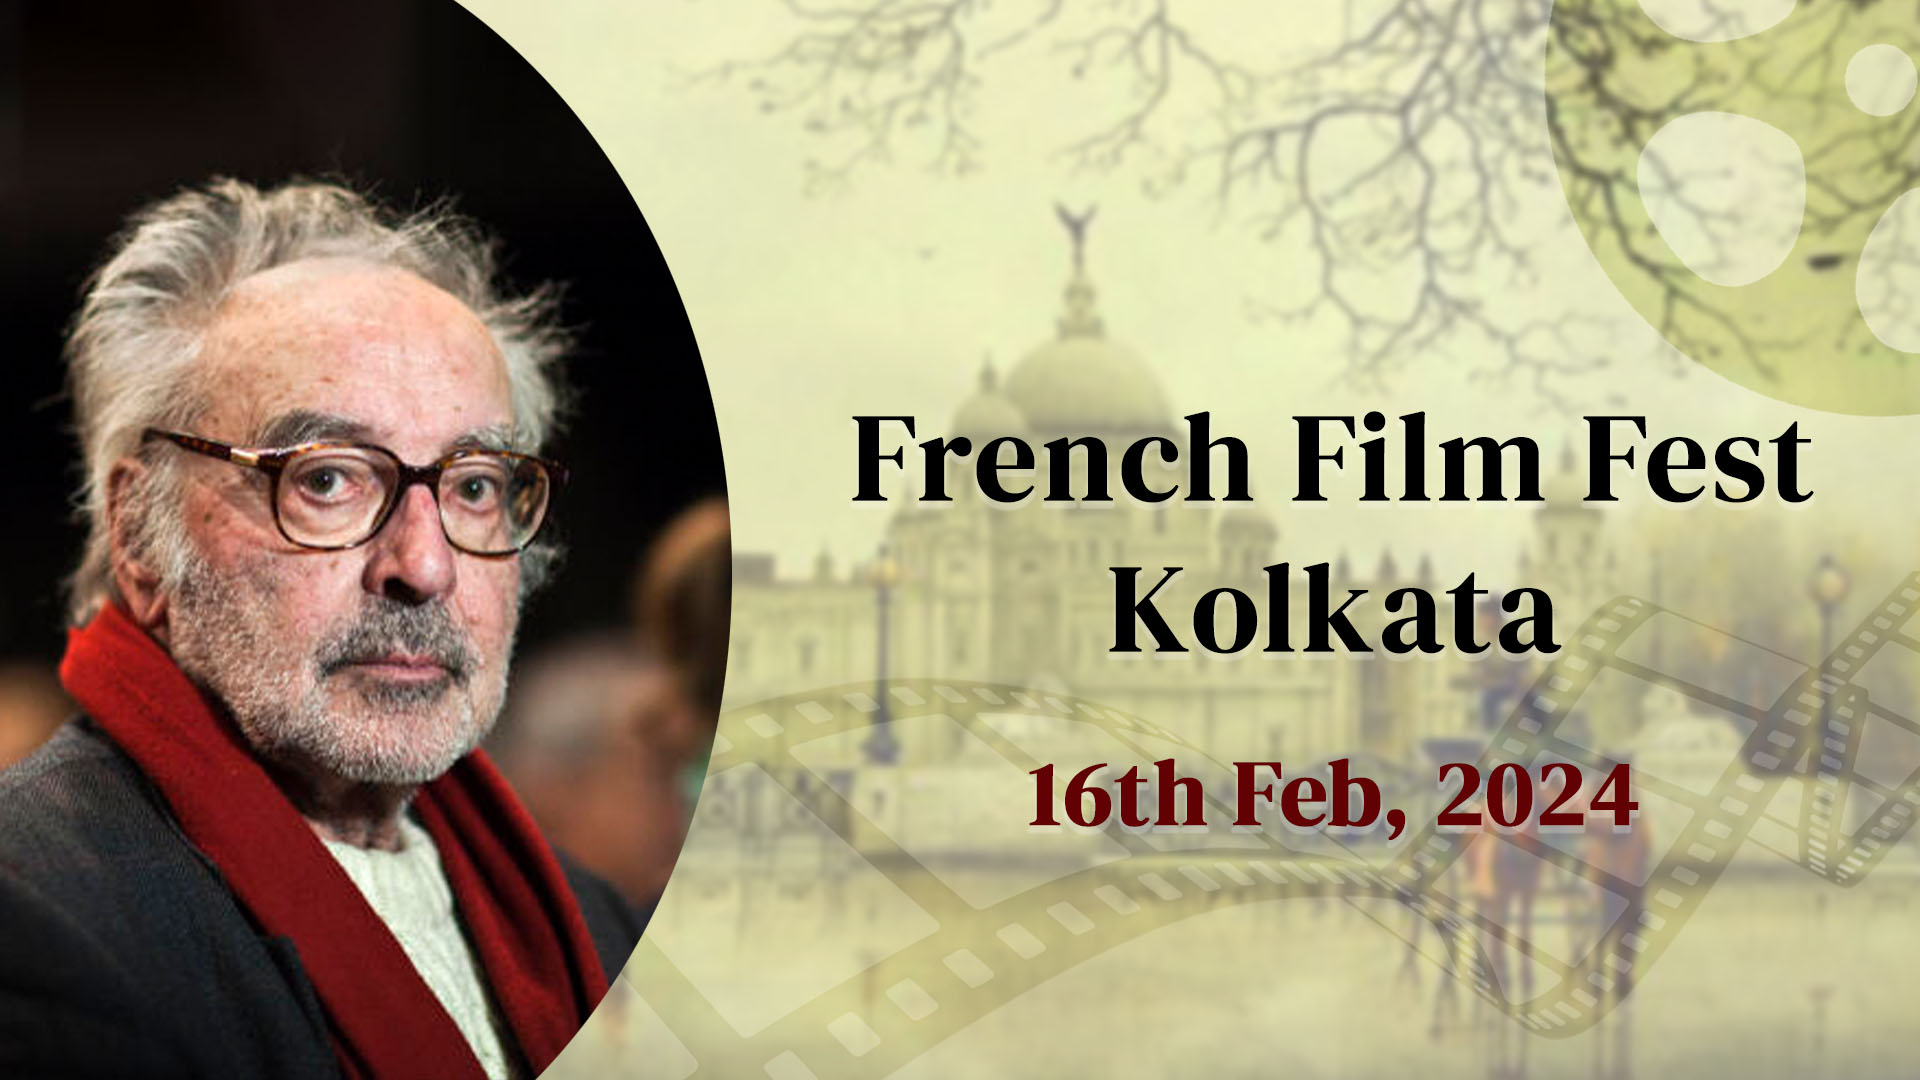 Get Ready for the French Film Fest Extravaganza Starting on February 16!